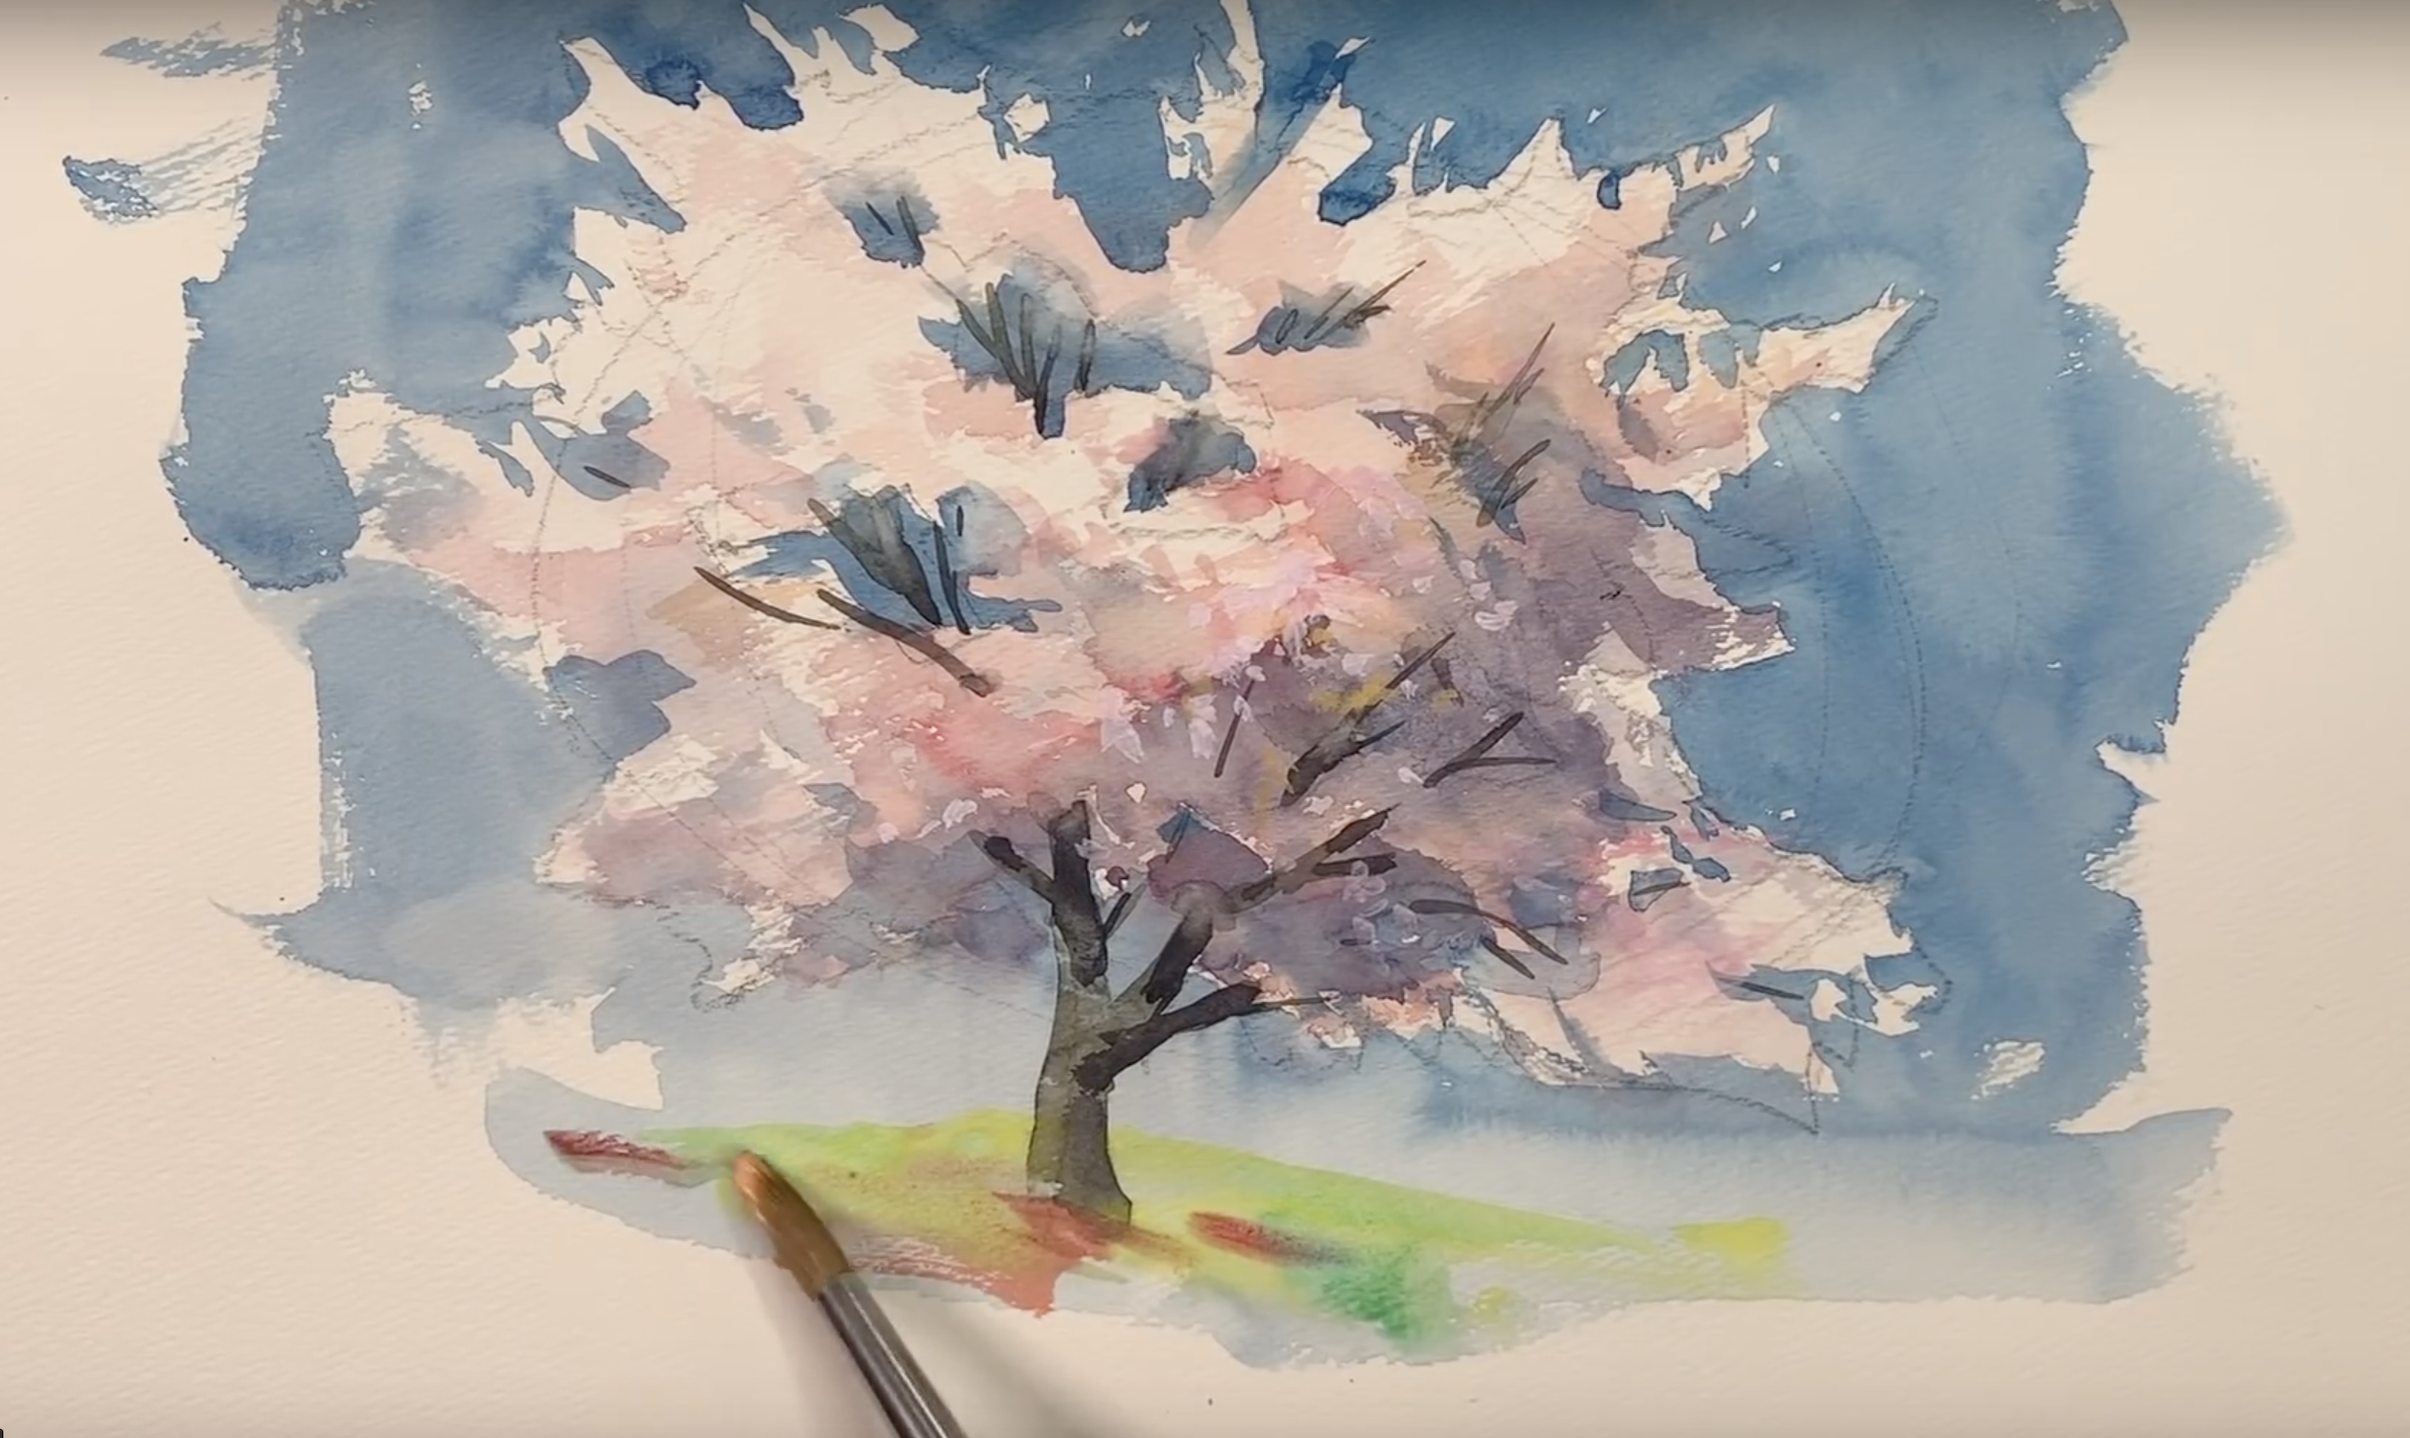 easy-watercolor-techniques-painting-japanese-flowers-within-5-minutes - STEP 8_revised